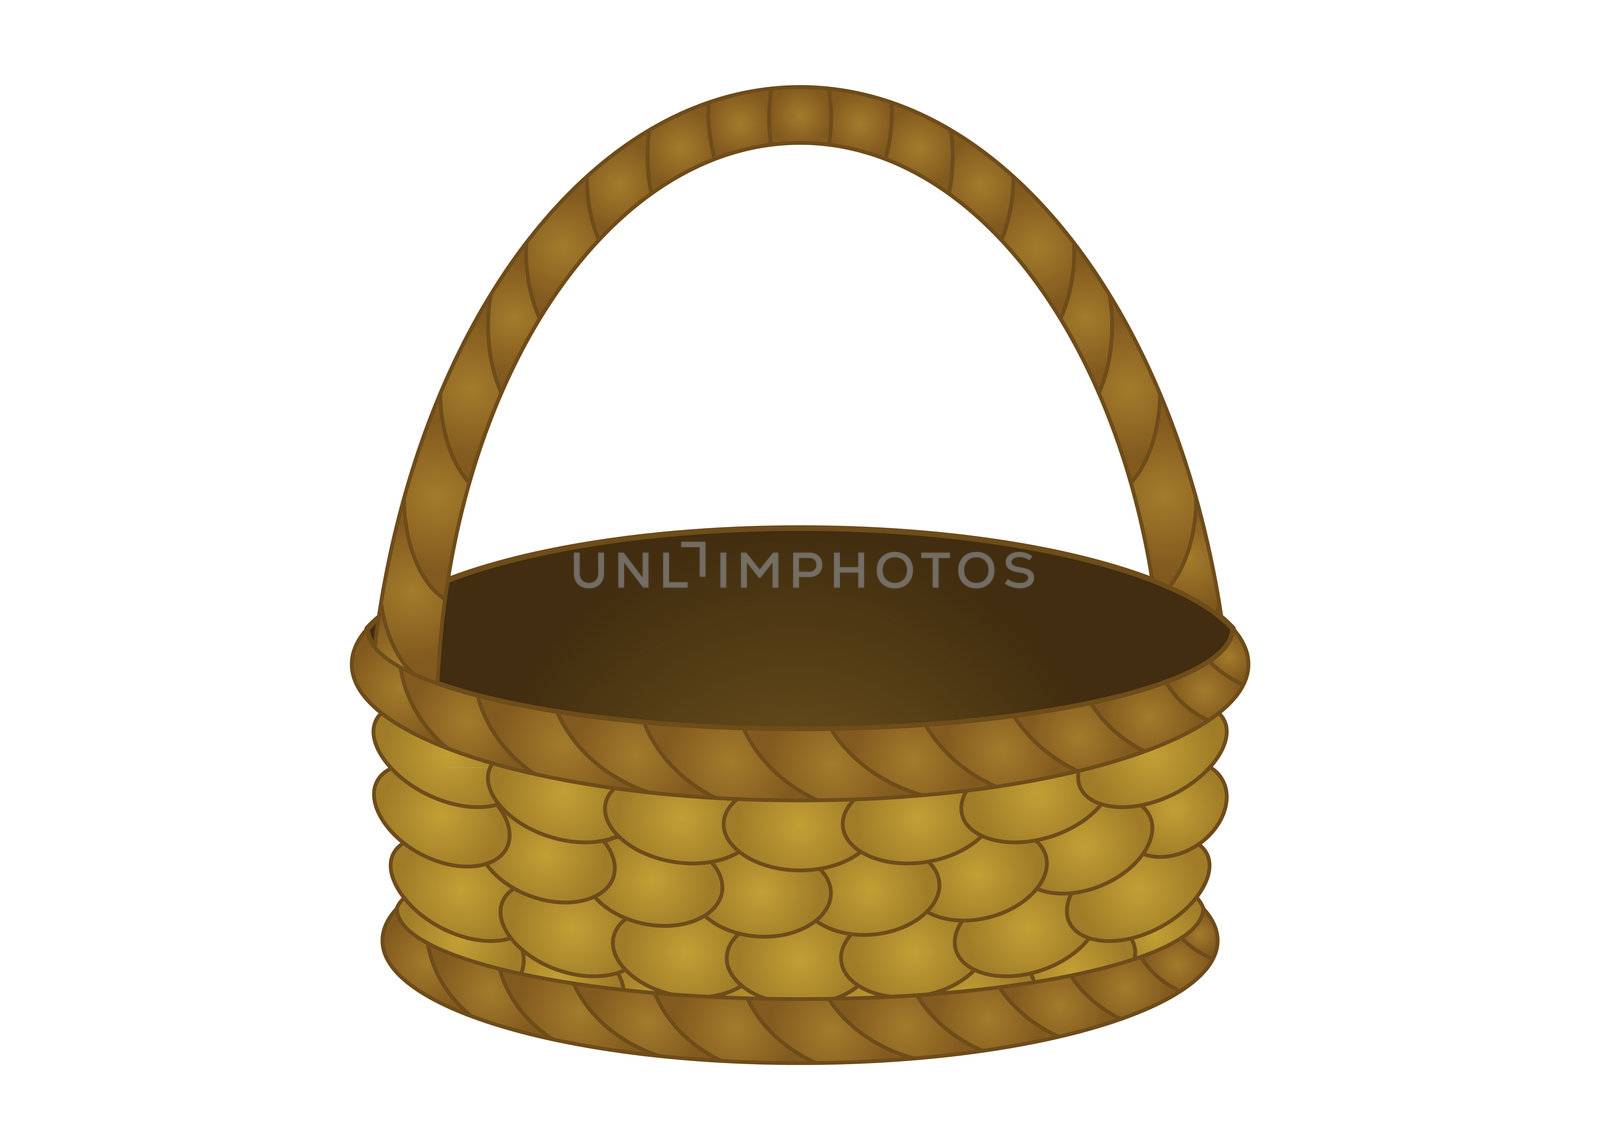 Old-fashioned wattled country basket with the handle and a flat bottom